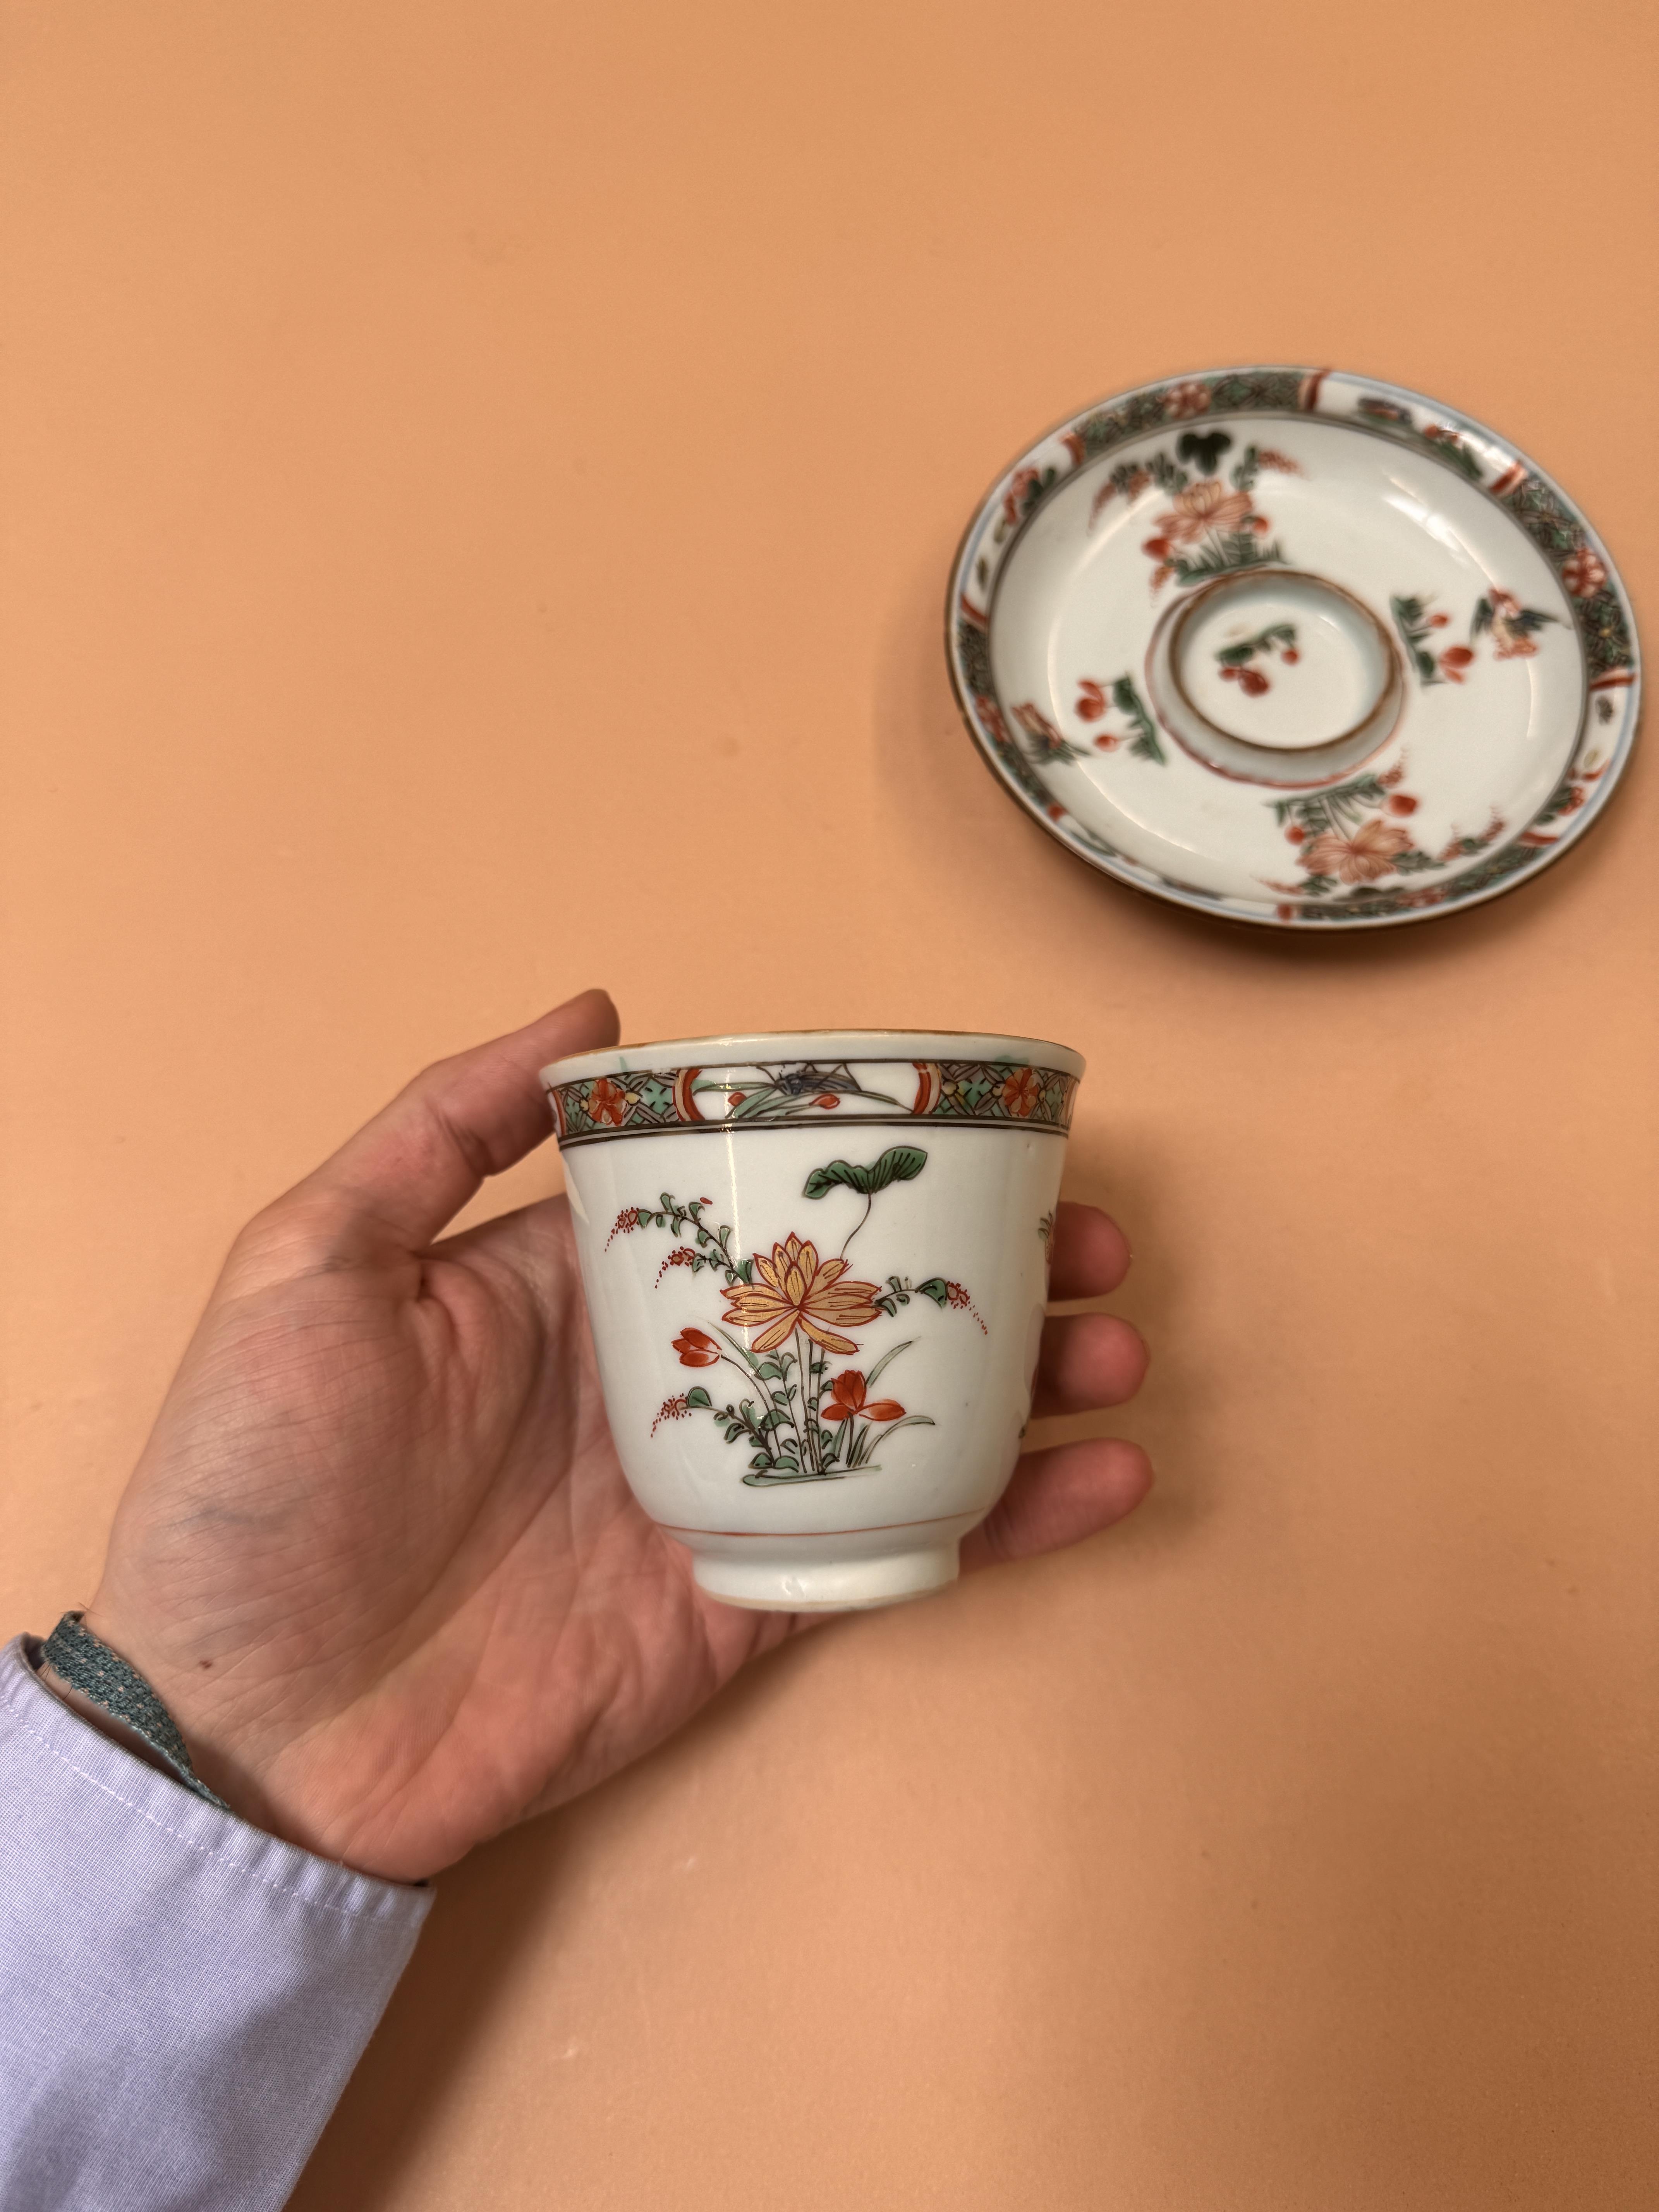 A CHINESE FAMILLE-VERTE CUP AND SAUCER 清康熙 五彩花鳥圖盃連盤 - Image 8 of 18